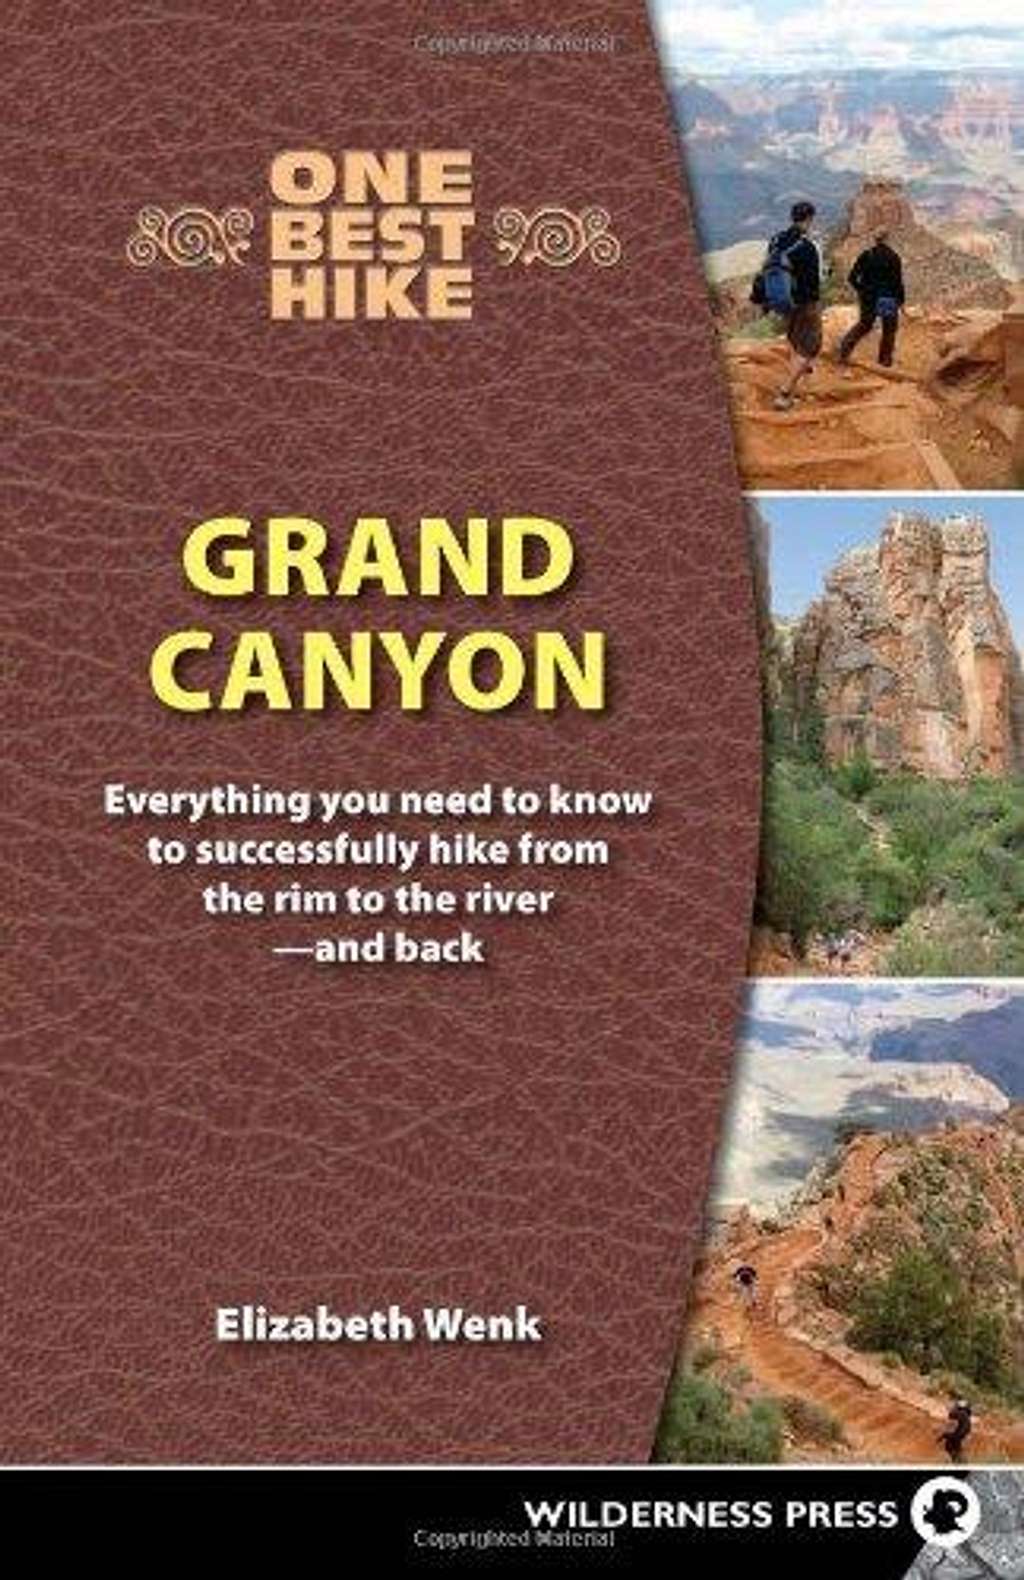 One Best Hike-Grand Canyon